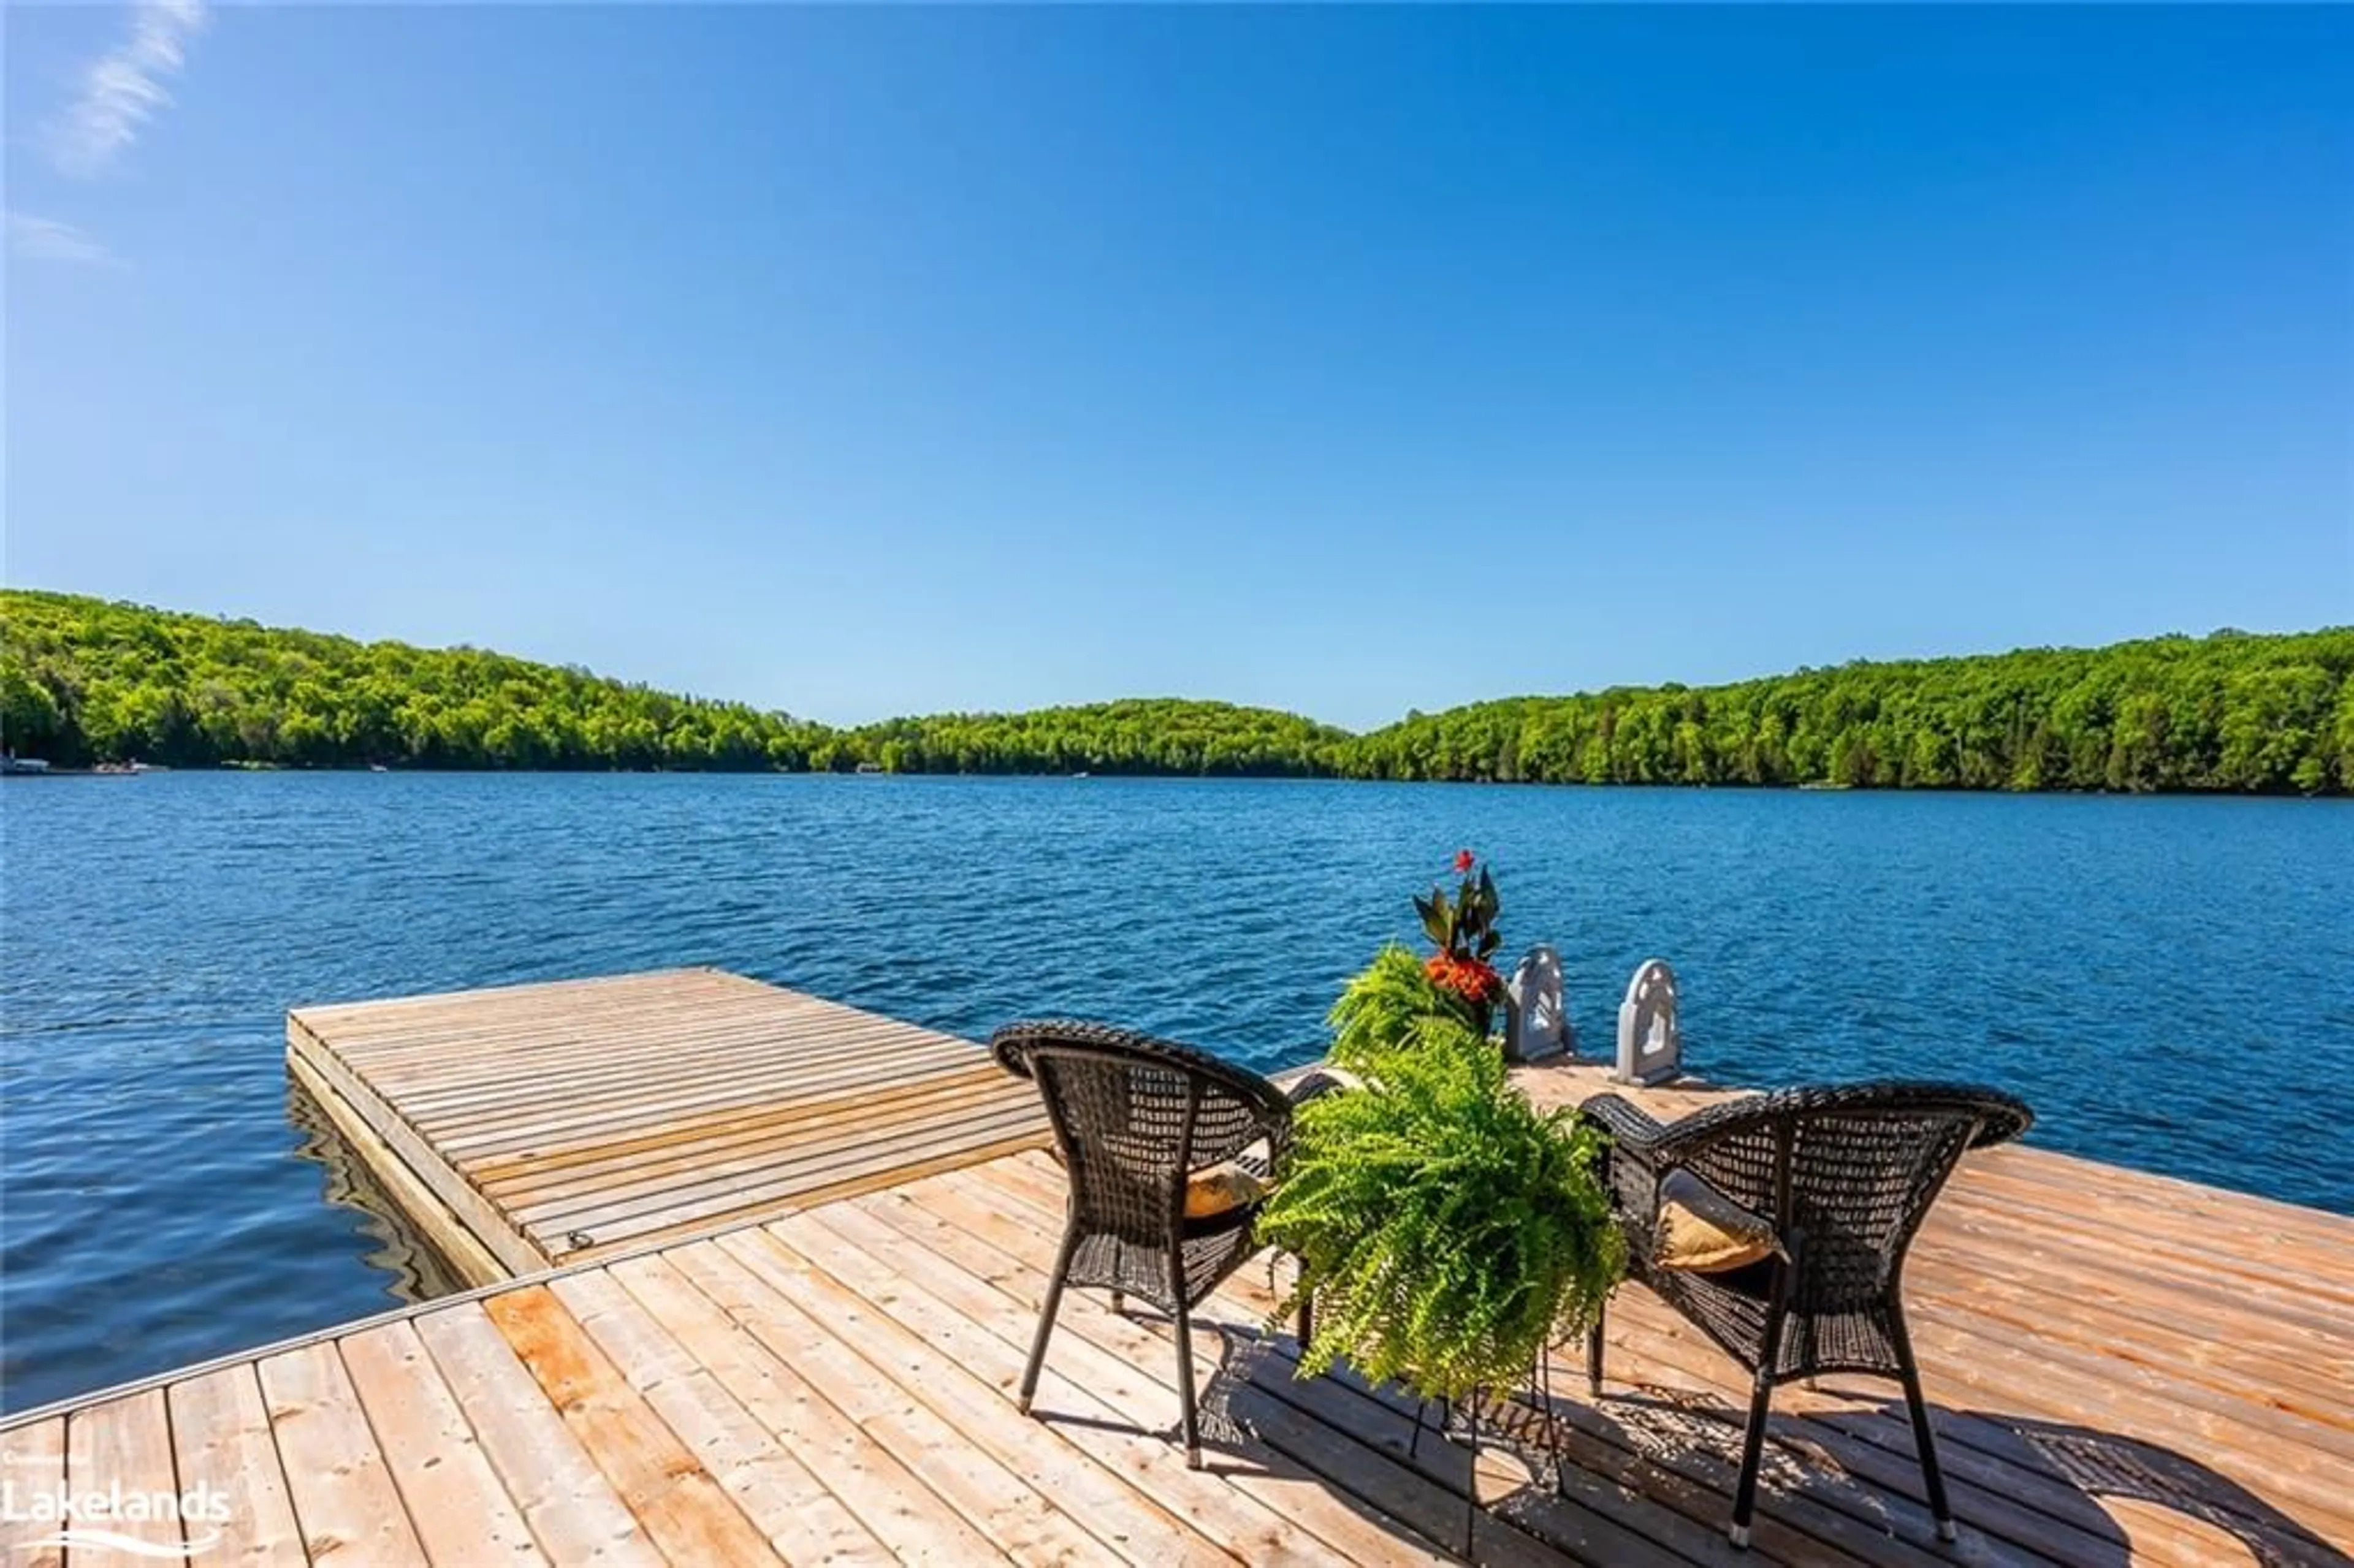 Outside view for 1044 Snowshoe Rd, Haliburton Ontario K0M 1S0